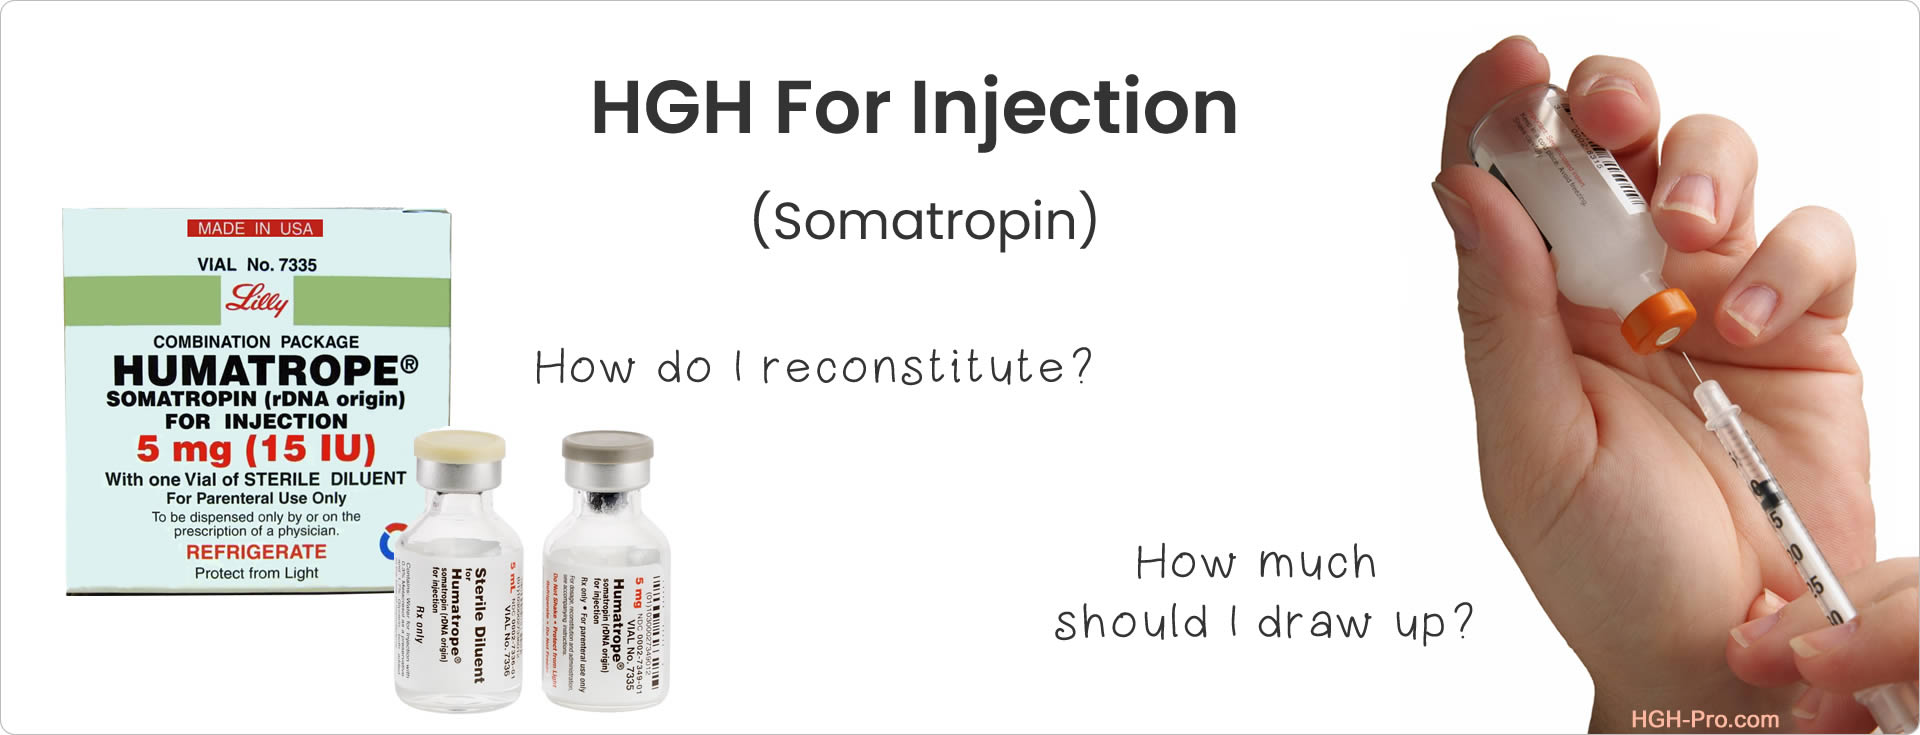 HGH Injections - reconstitute and figure dose